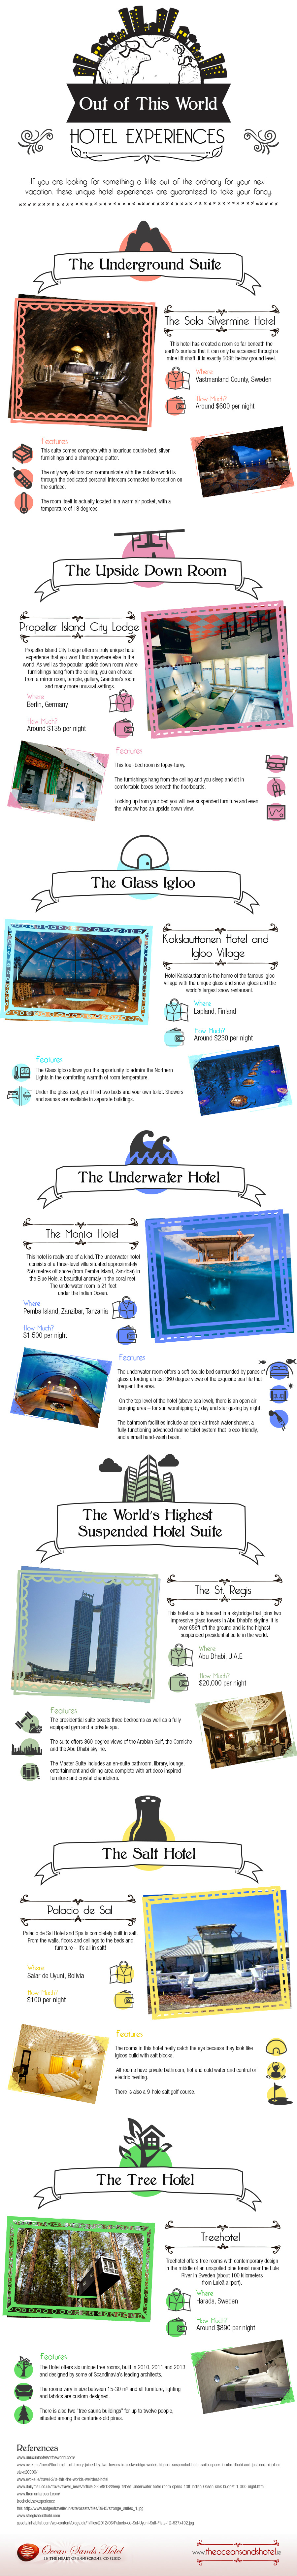 Out-of-This-World-Hotel-Experiences-Infographic (1)